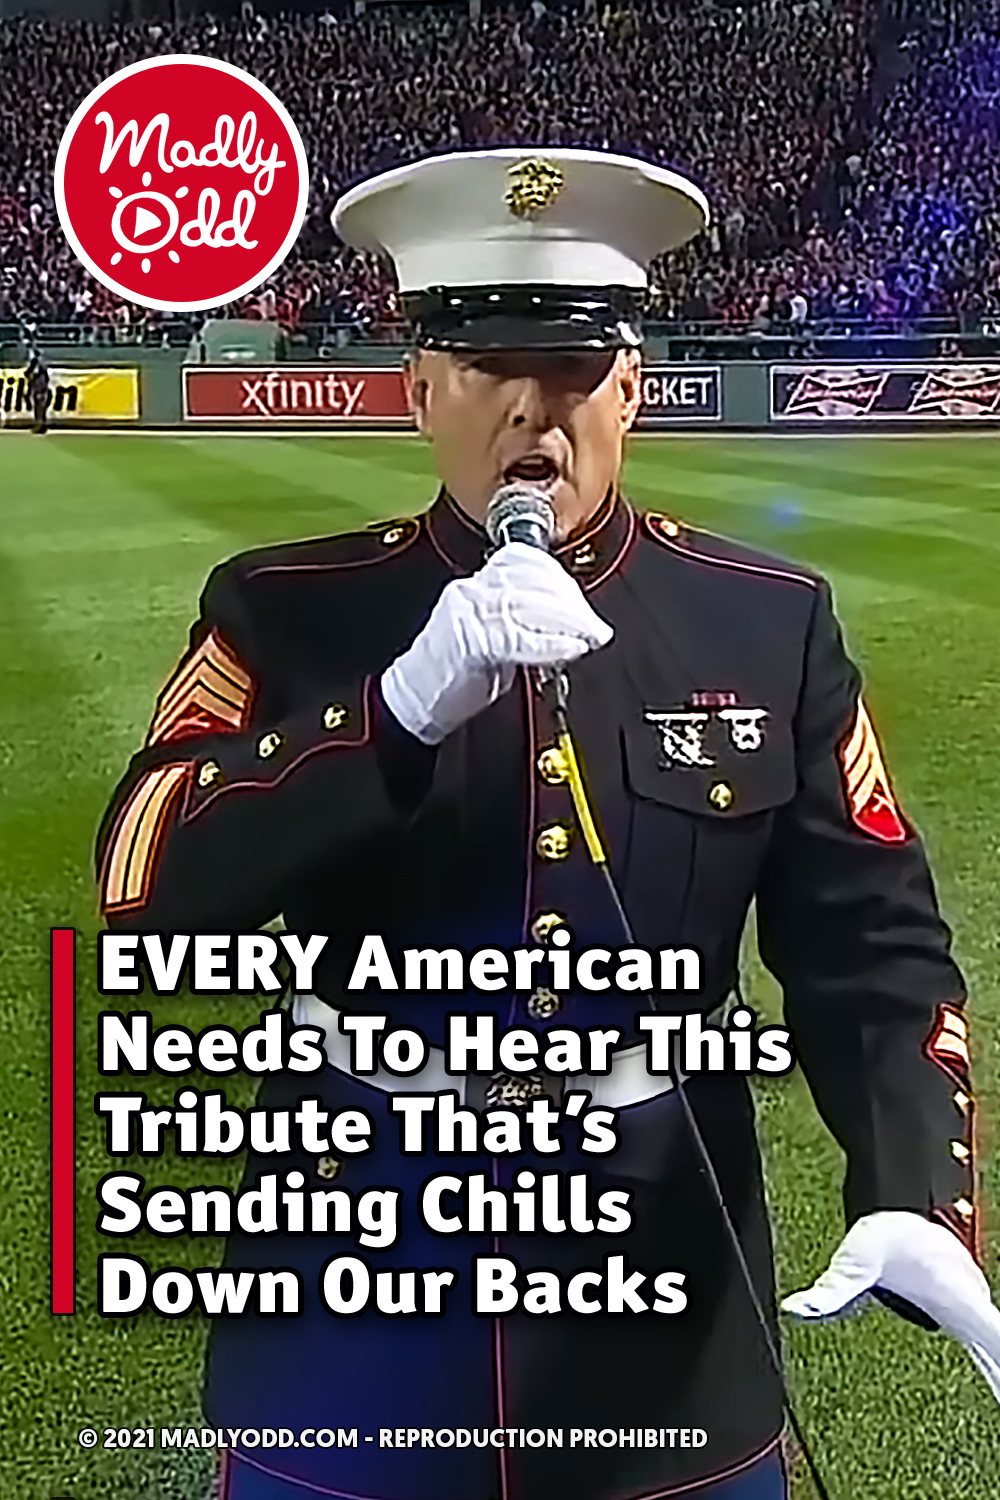 EVERY American Needs To Hear This Tribute That’s Sending Chills Down Our Backs